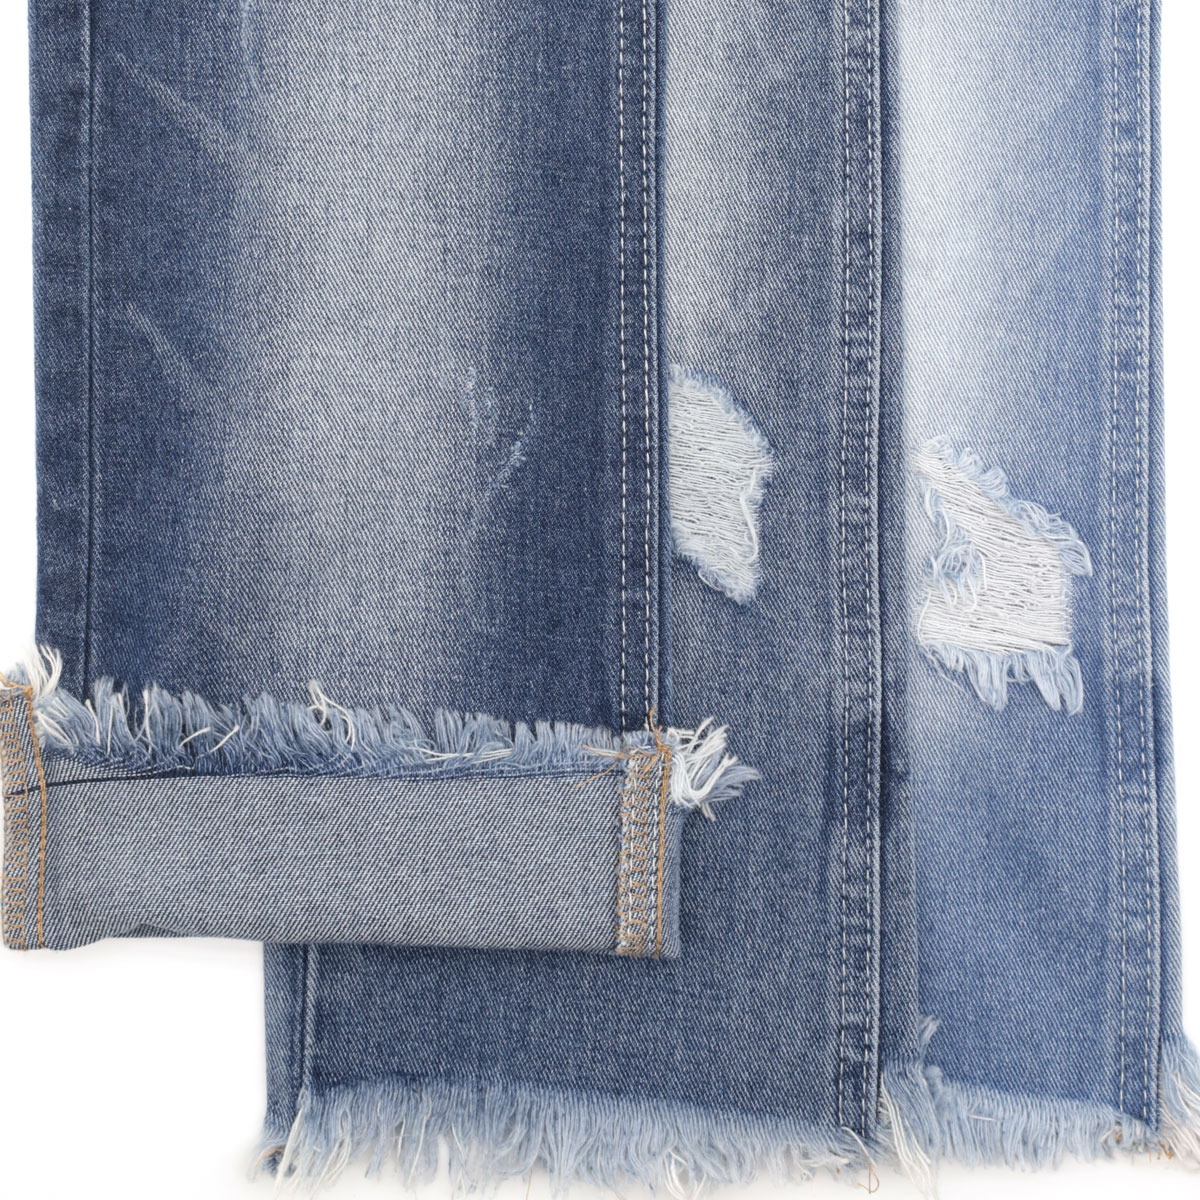 Is There Any Way to Remove Liquid Correction Fluid on Denim Jeans? 1